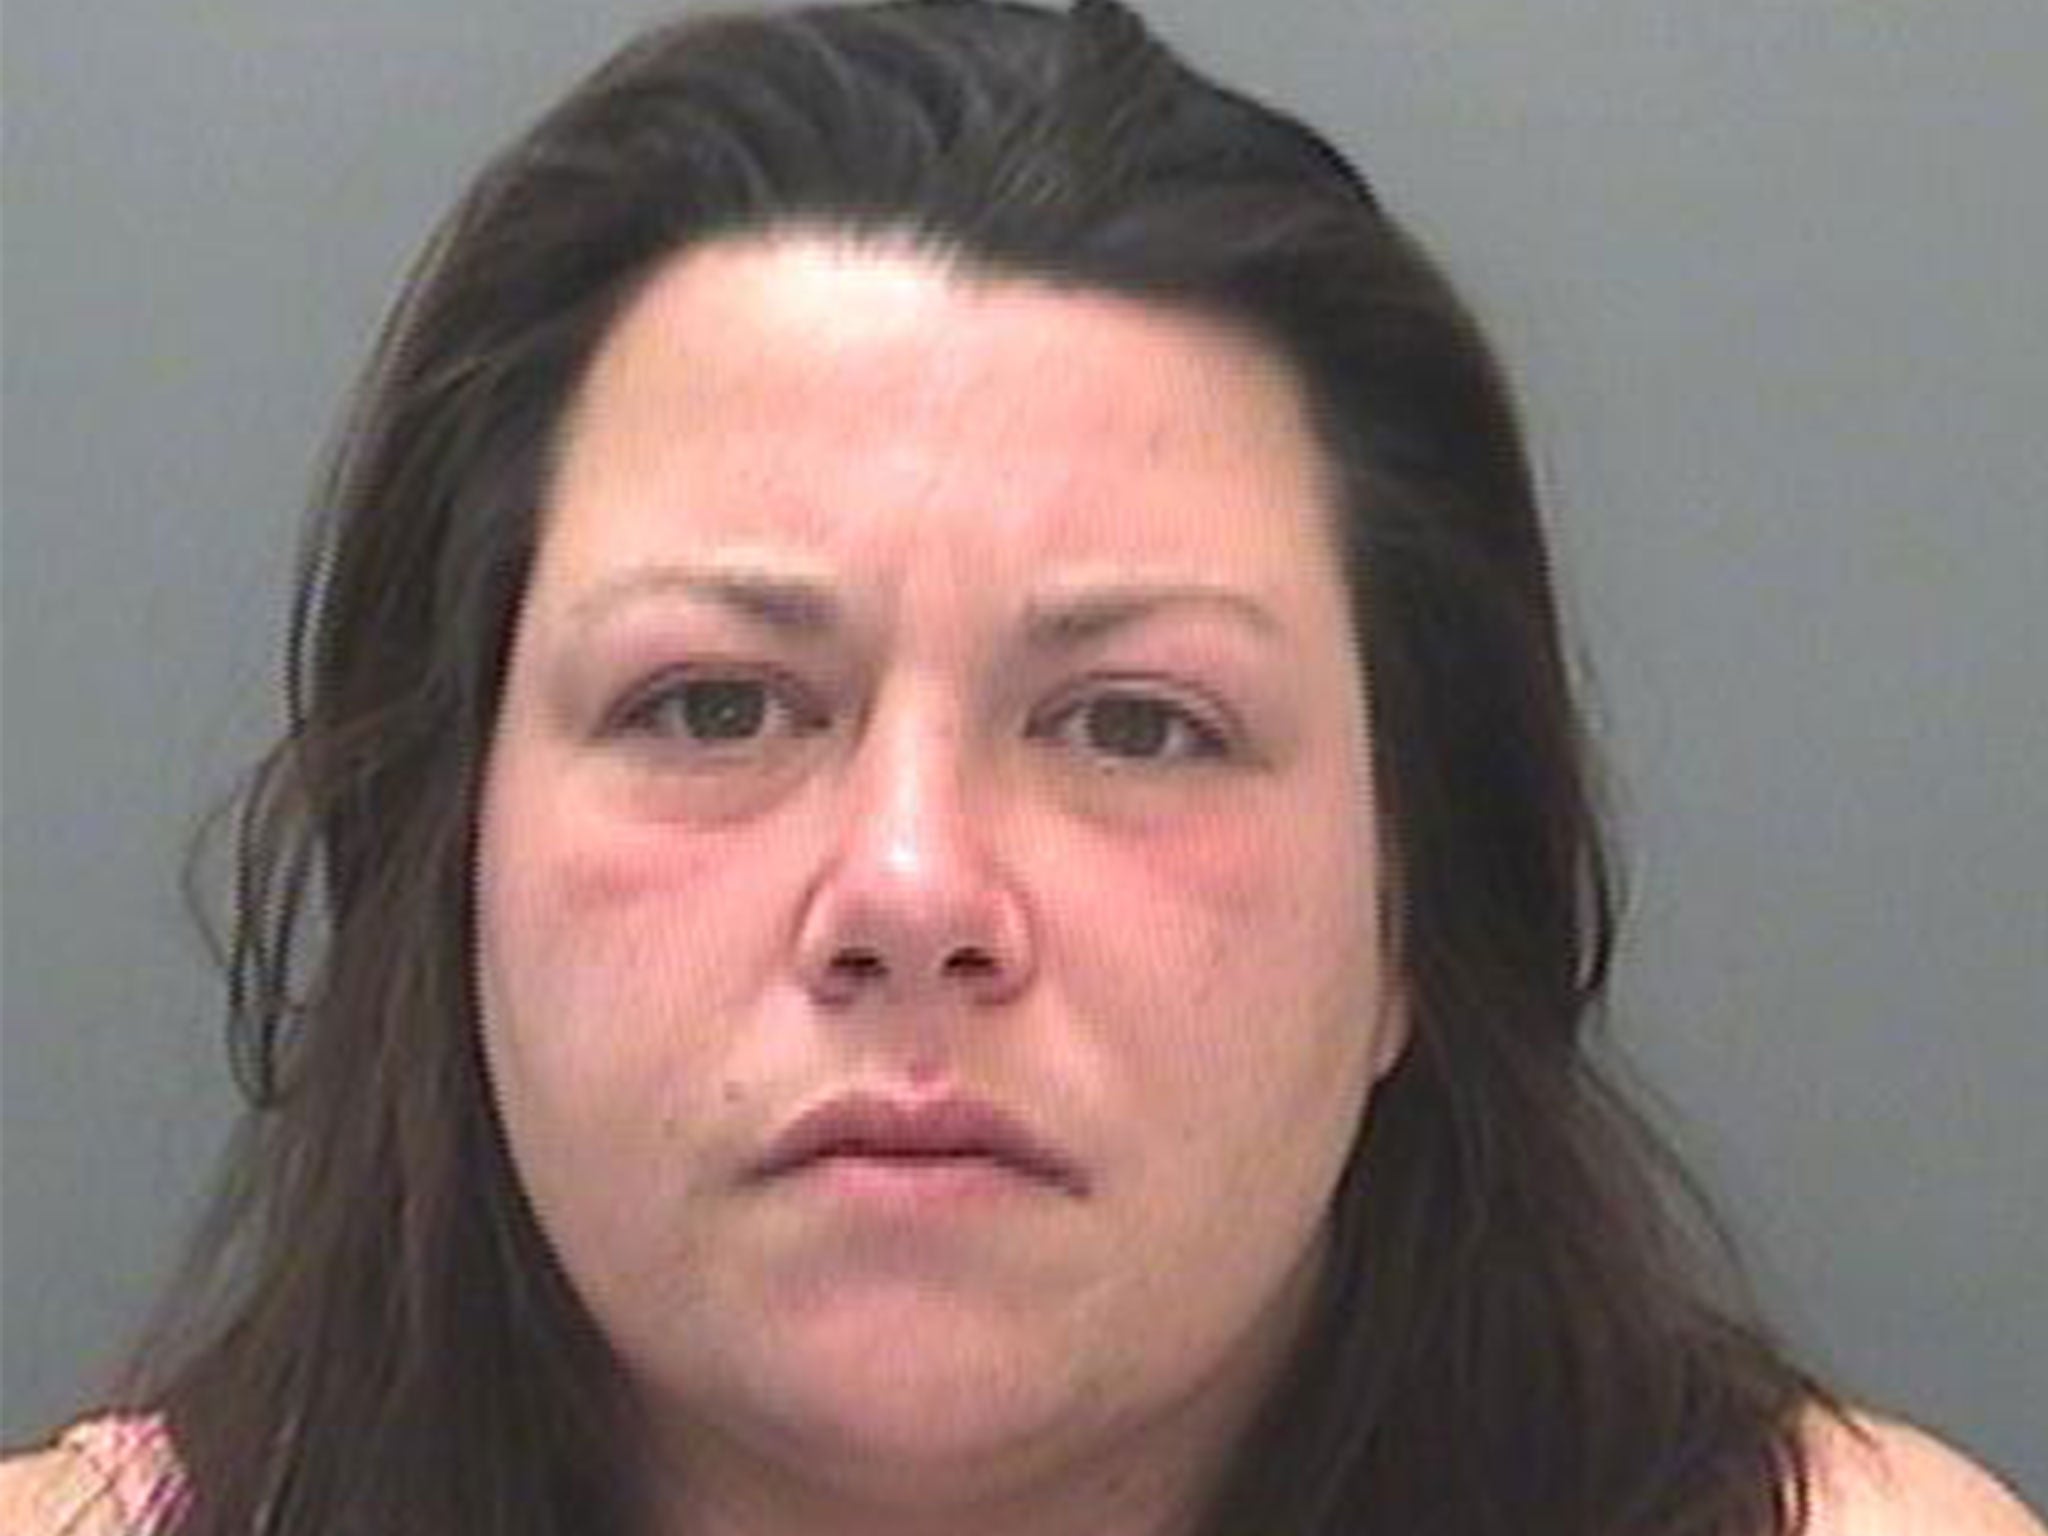 Savage was handed a life sentence after admitting to attempted murder at Cardiff Crown Court